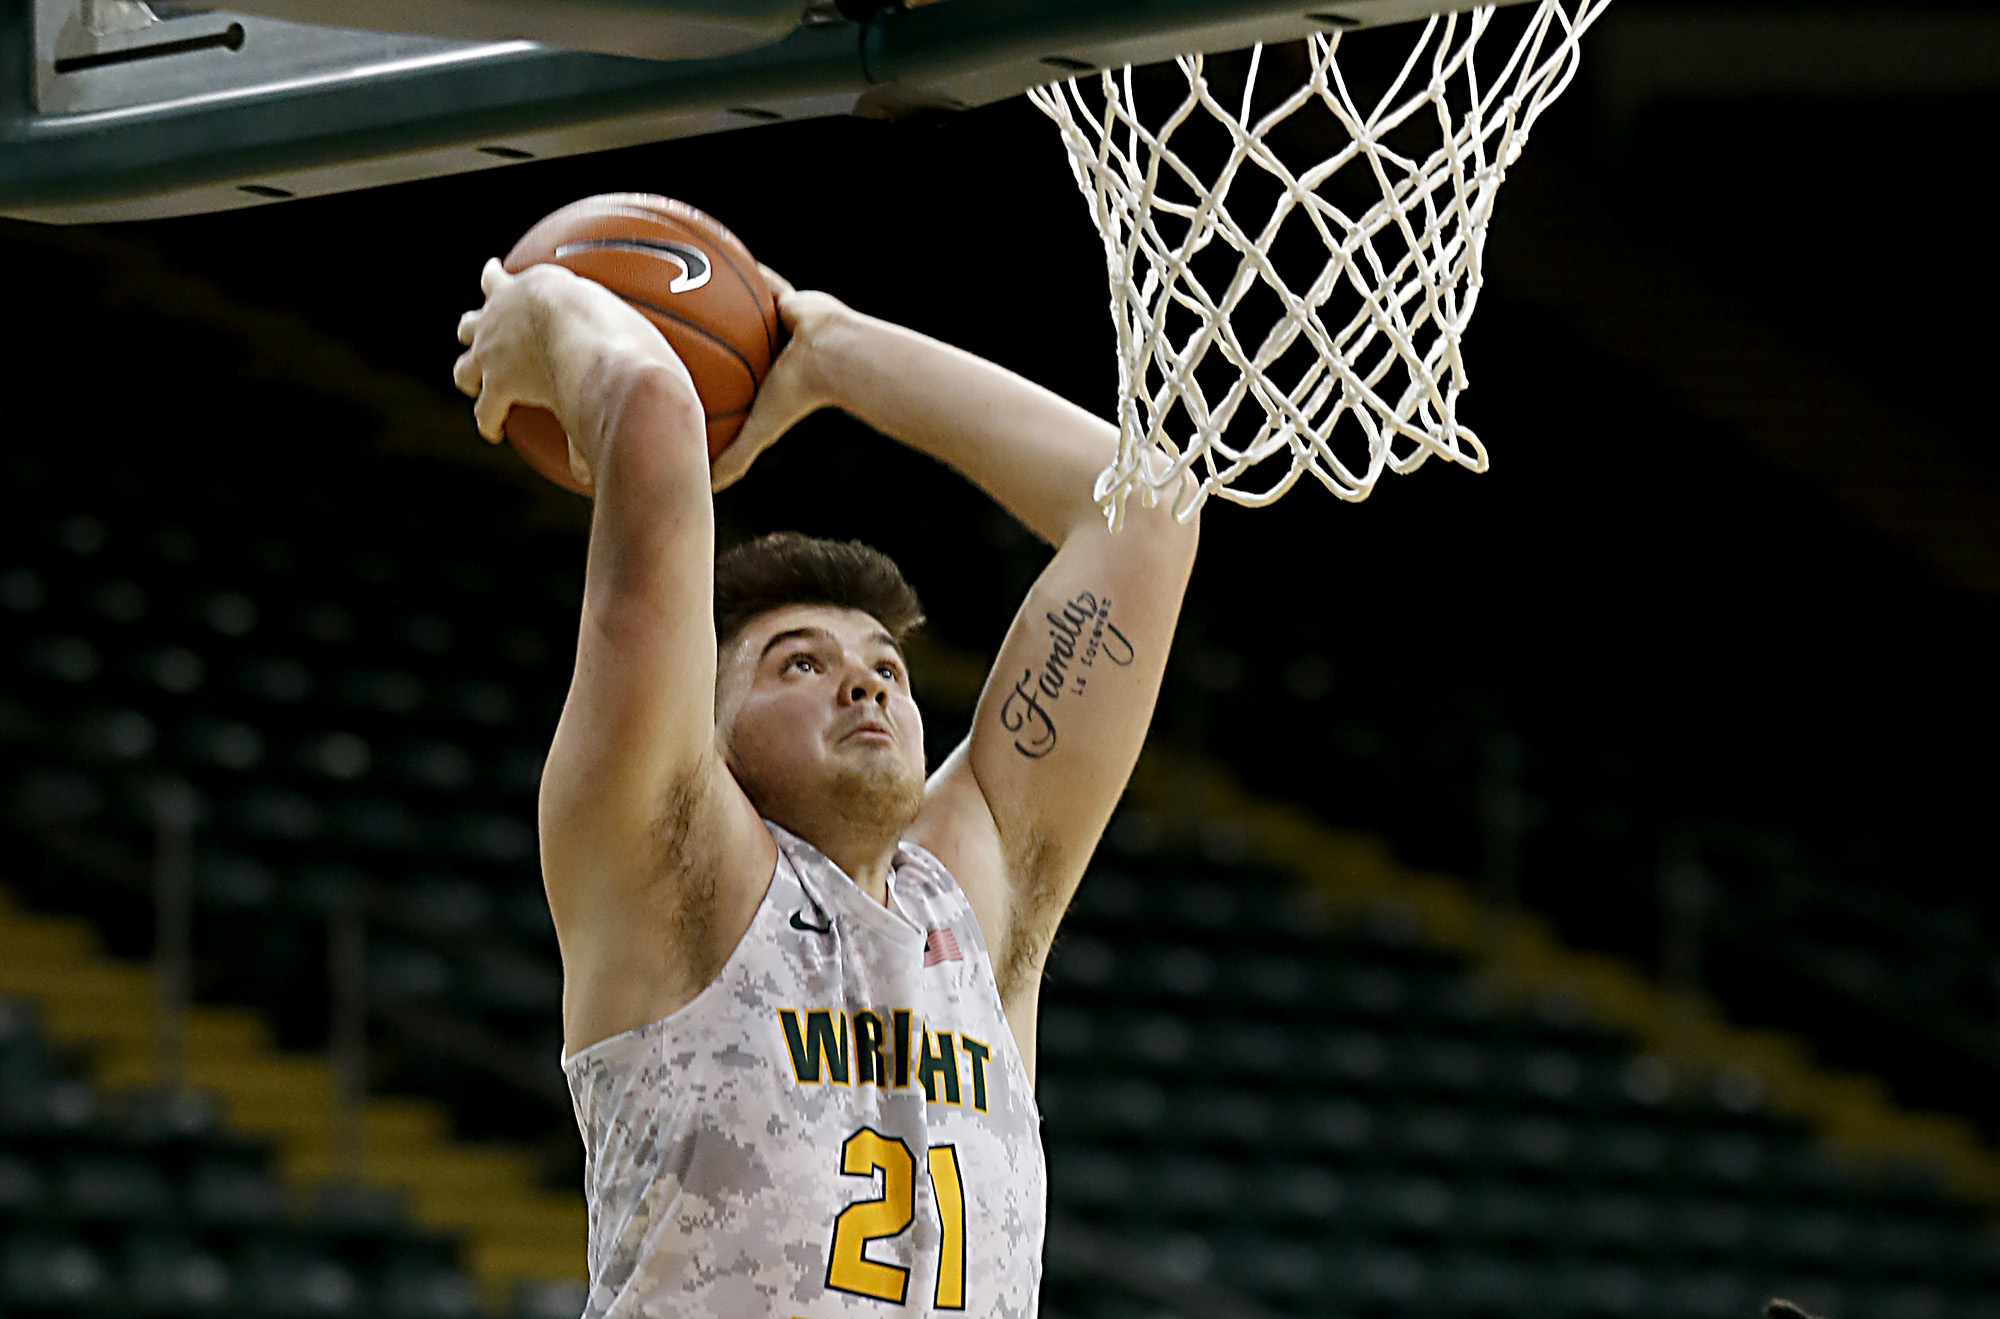 Holden's First Team Honor leads three Wright State Horizon